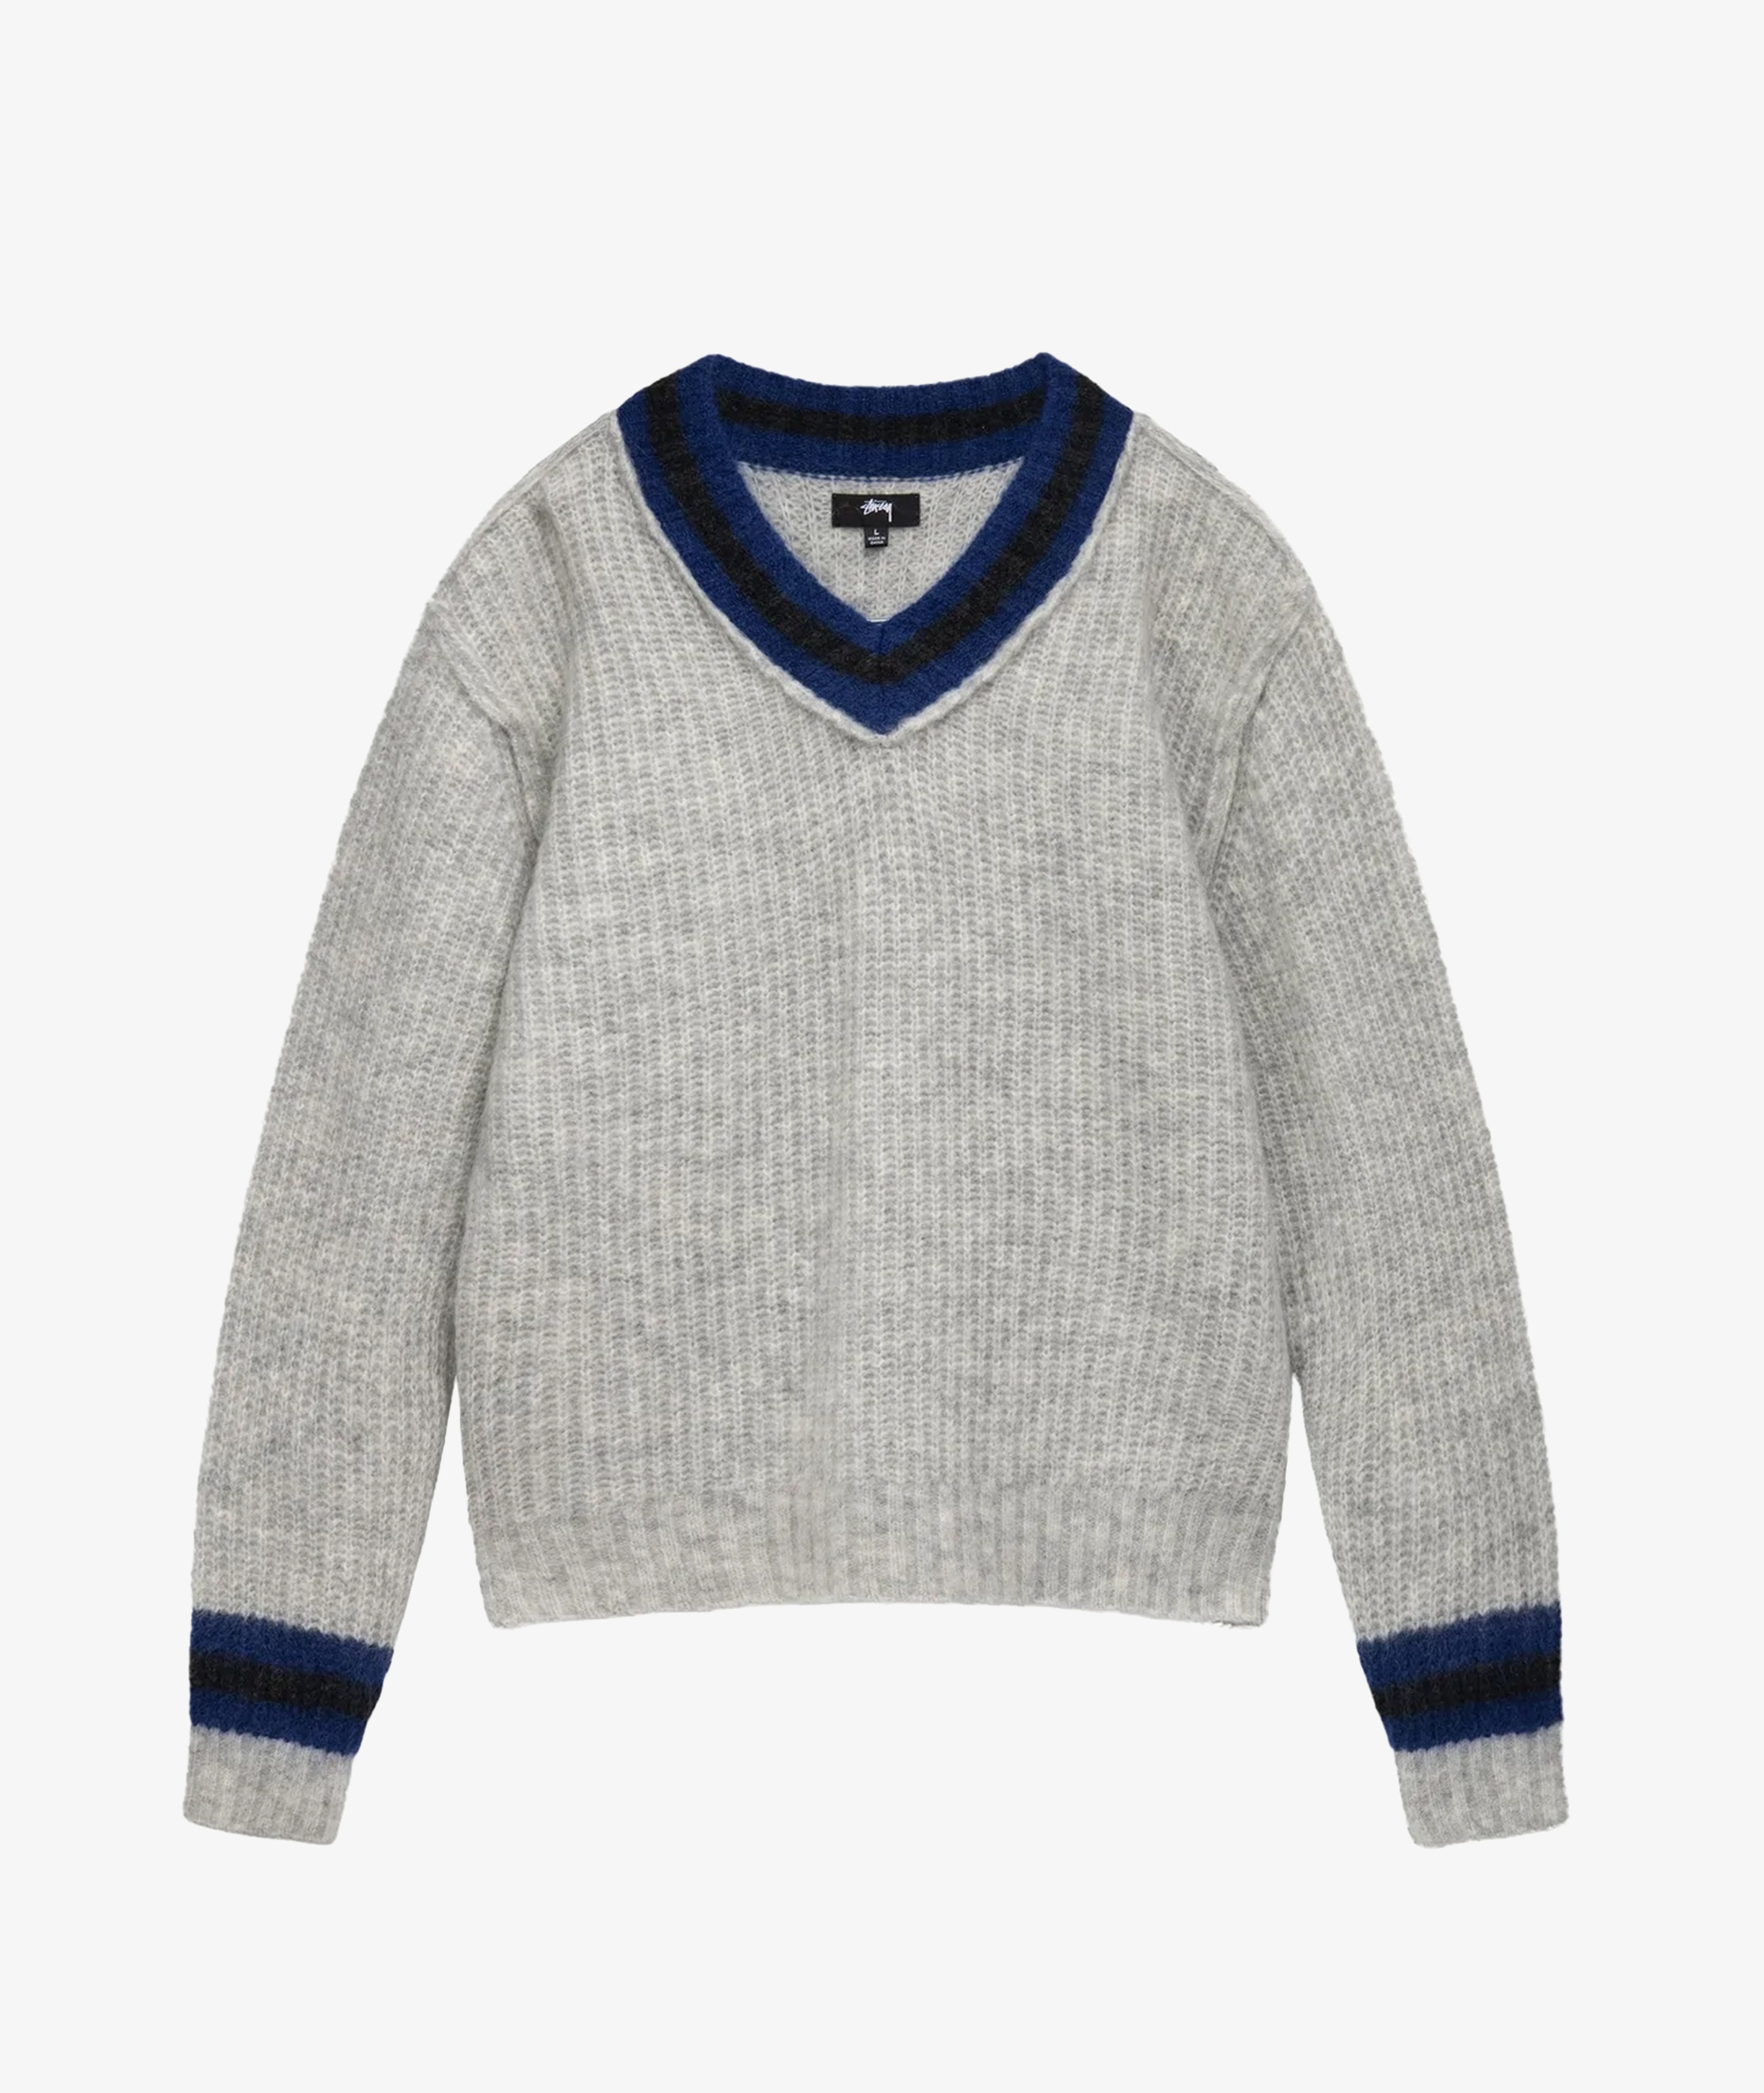 Norse Store | Shipping Worldwide - Stussy Mohair Tennis Sweater - Ash